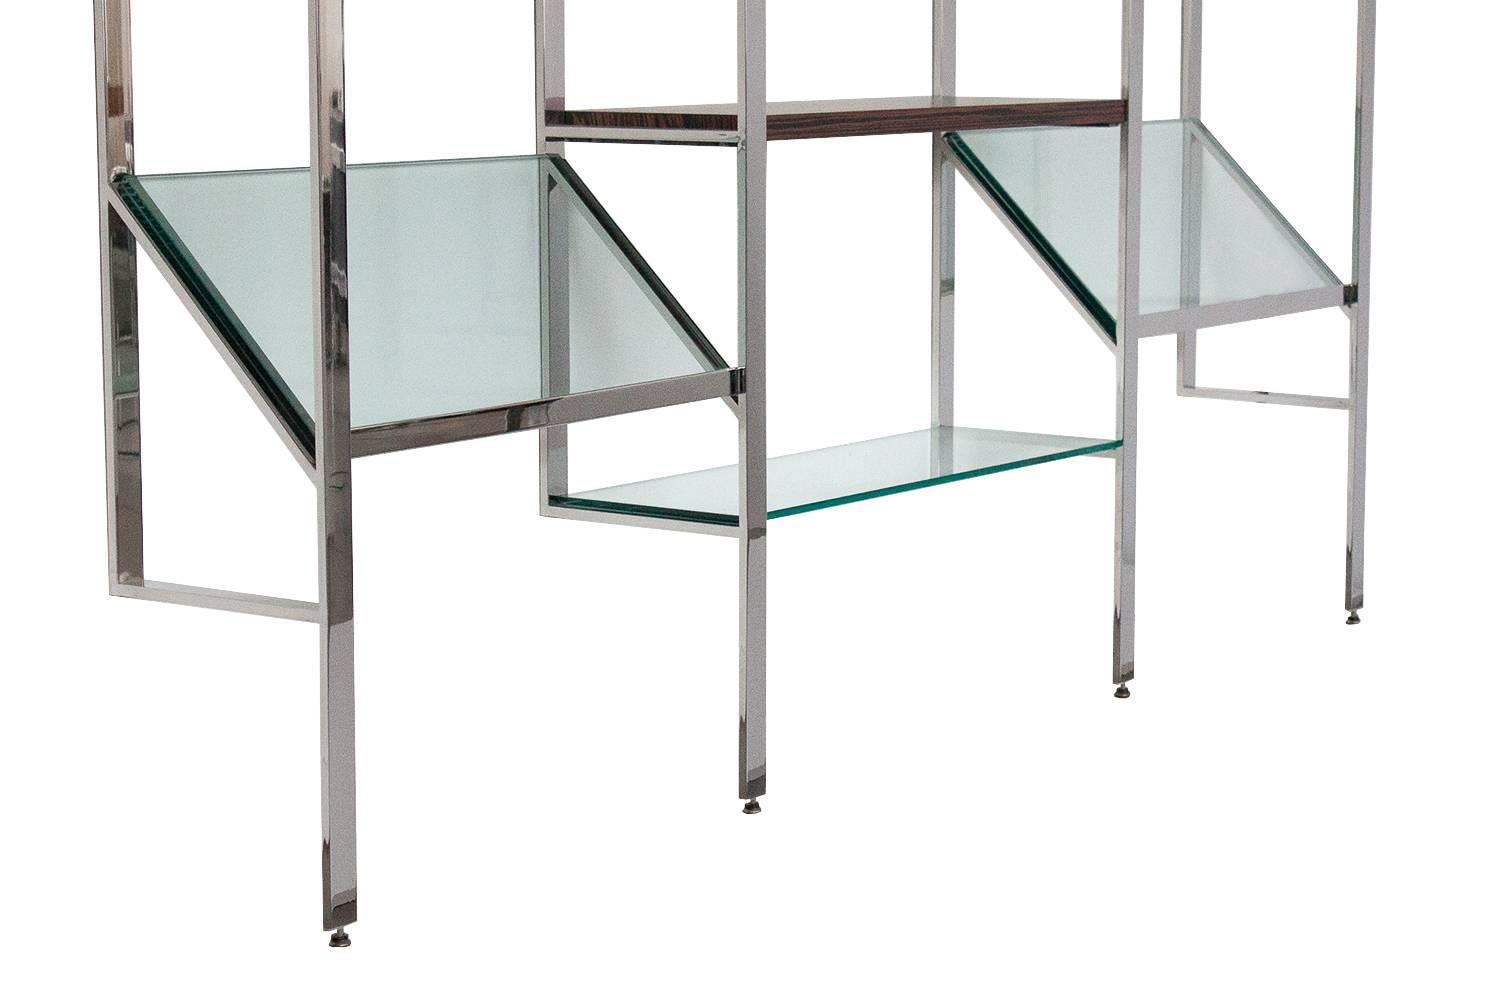 Mid-Century Modern Milo Baughman Chrome and Glass Wall-Mounted Shelving System